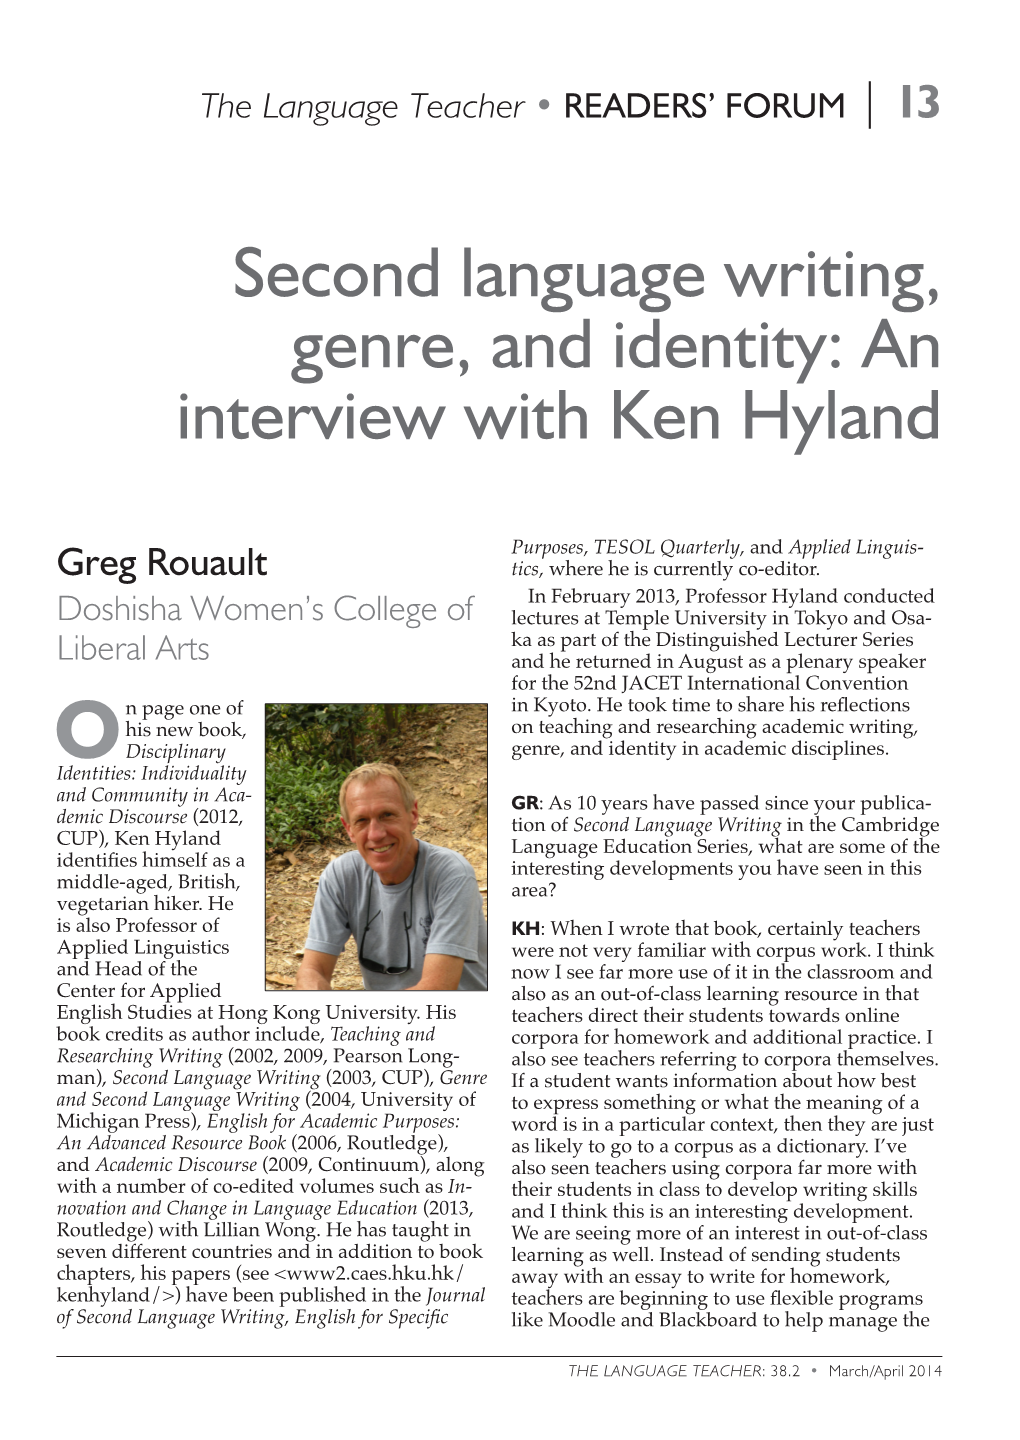 Second Language Writing, Genre, and Identity: an Interview with Ken Hyland